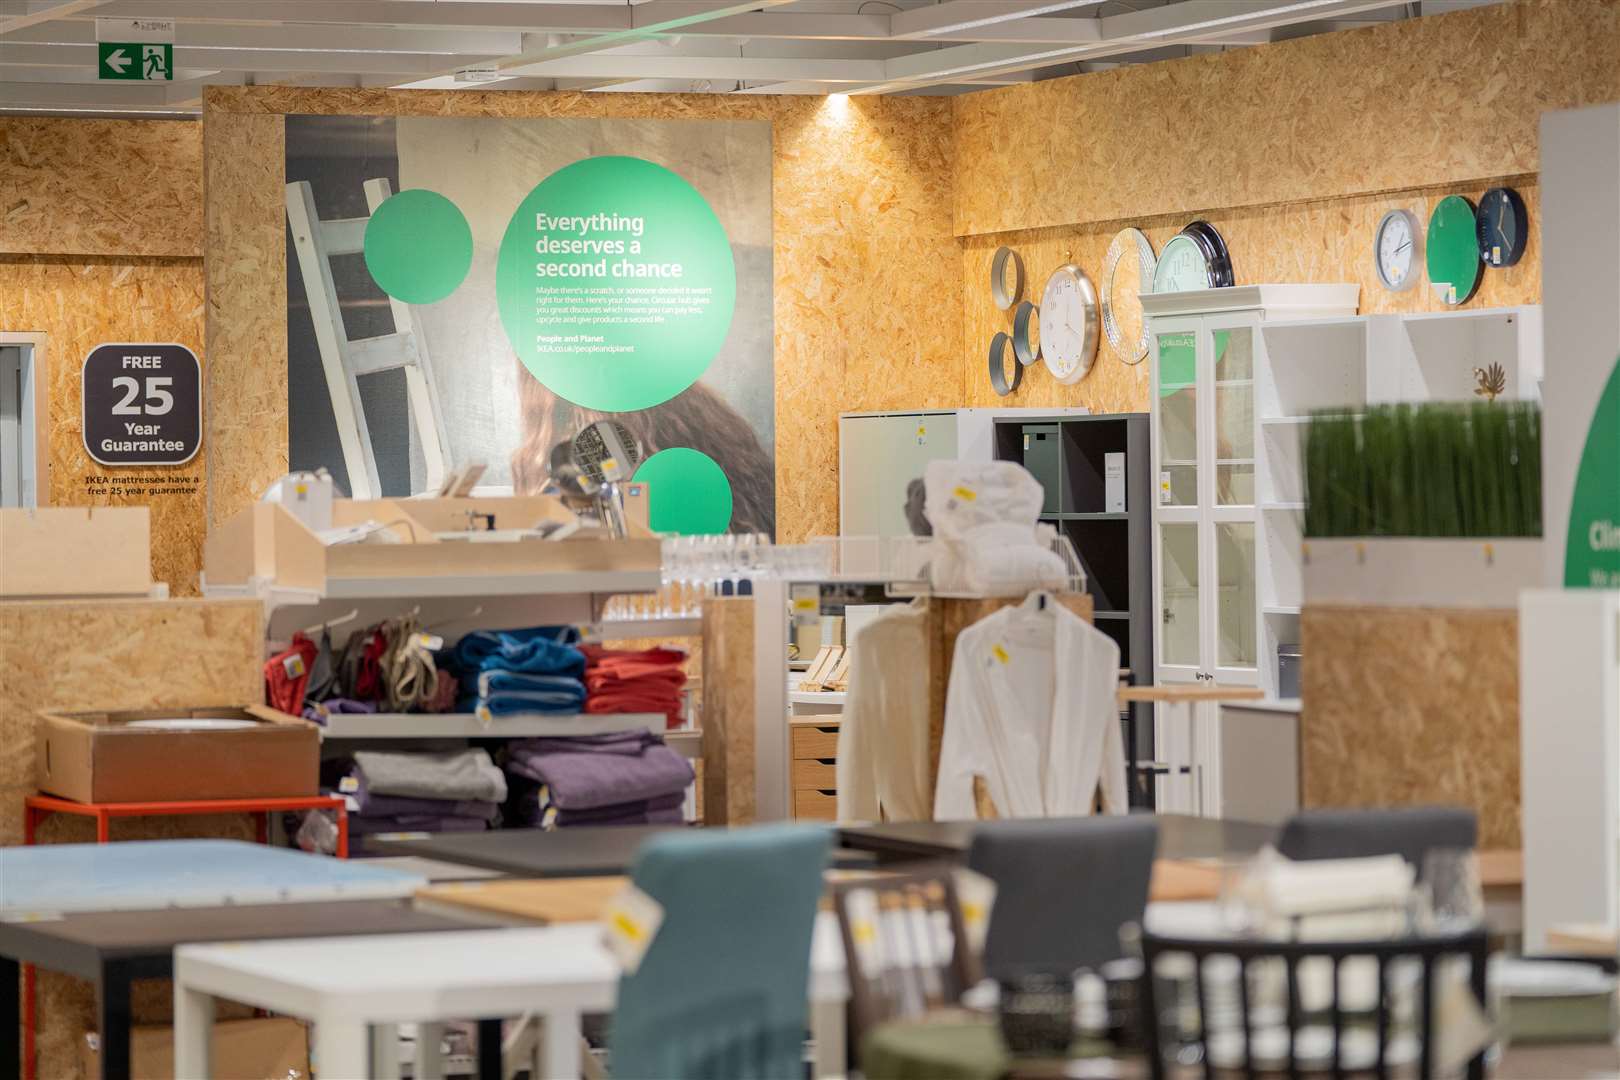 IKEA has launched Buy Back, enabling customers to sell back old furniture, giving thousands of items a second life